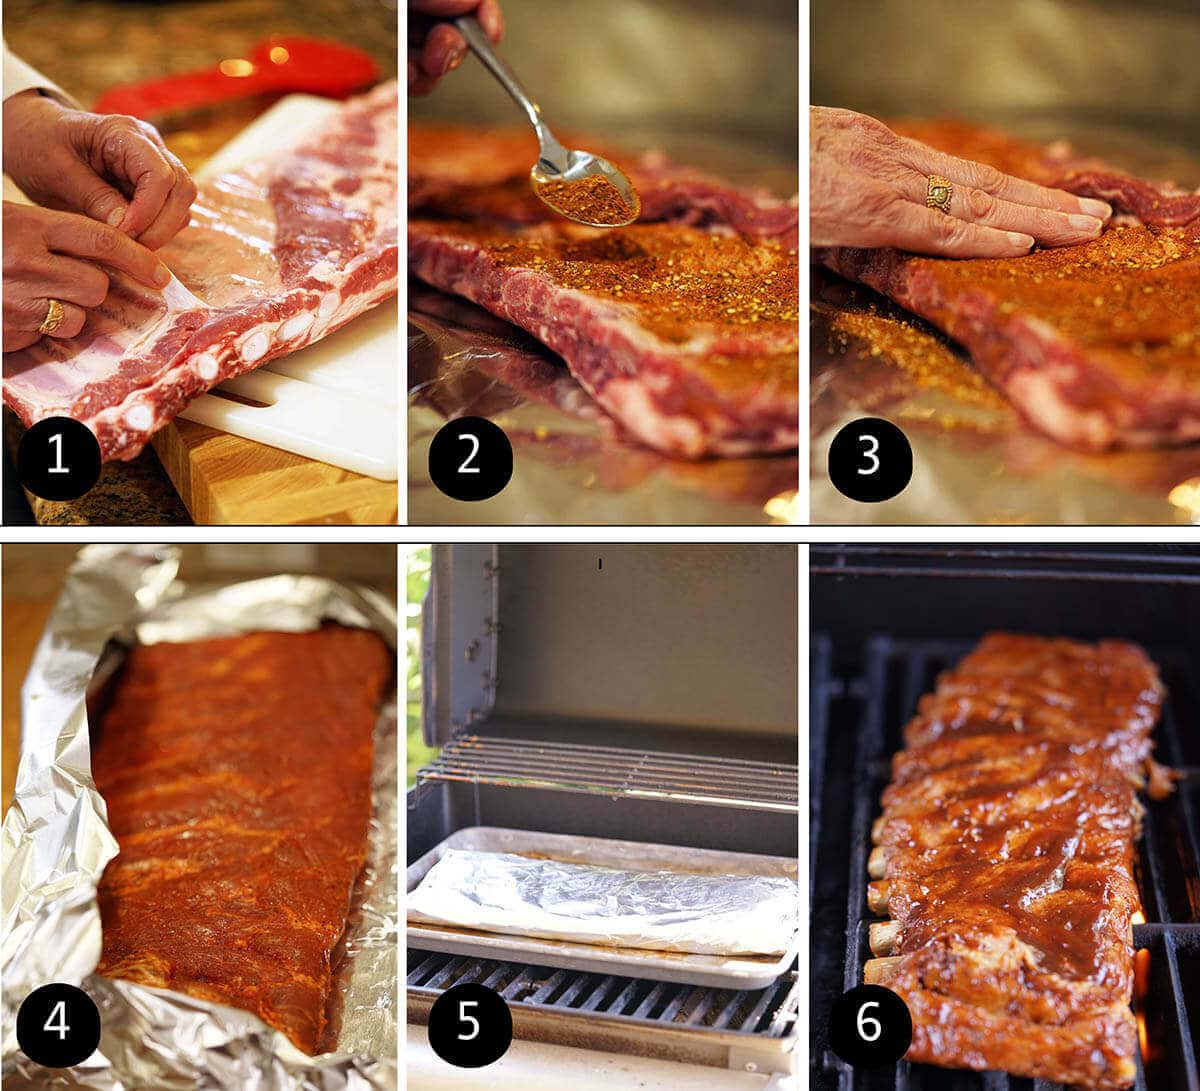 Step by step instructions to prepare and grill ribs on a gas grill.